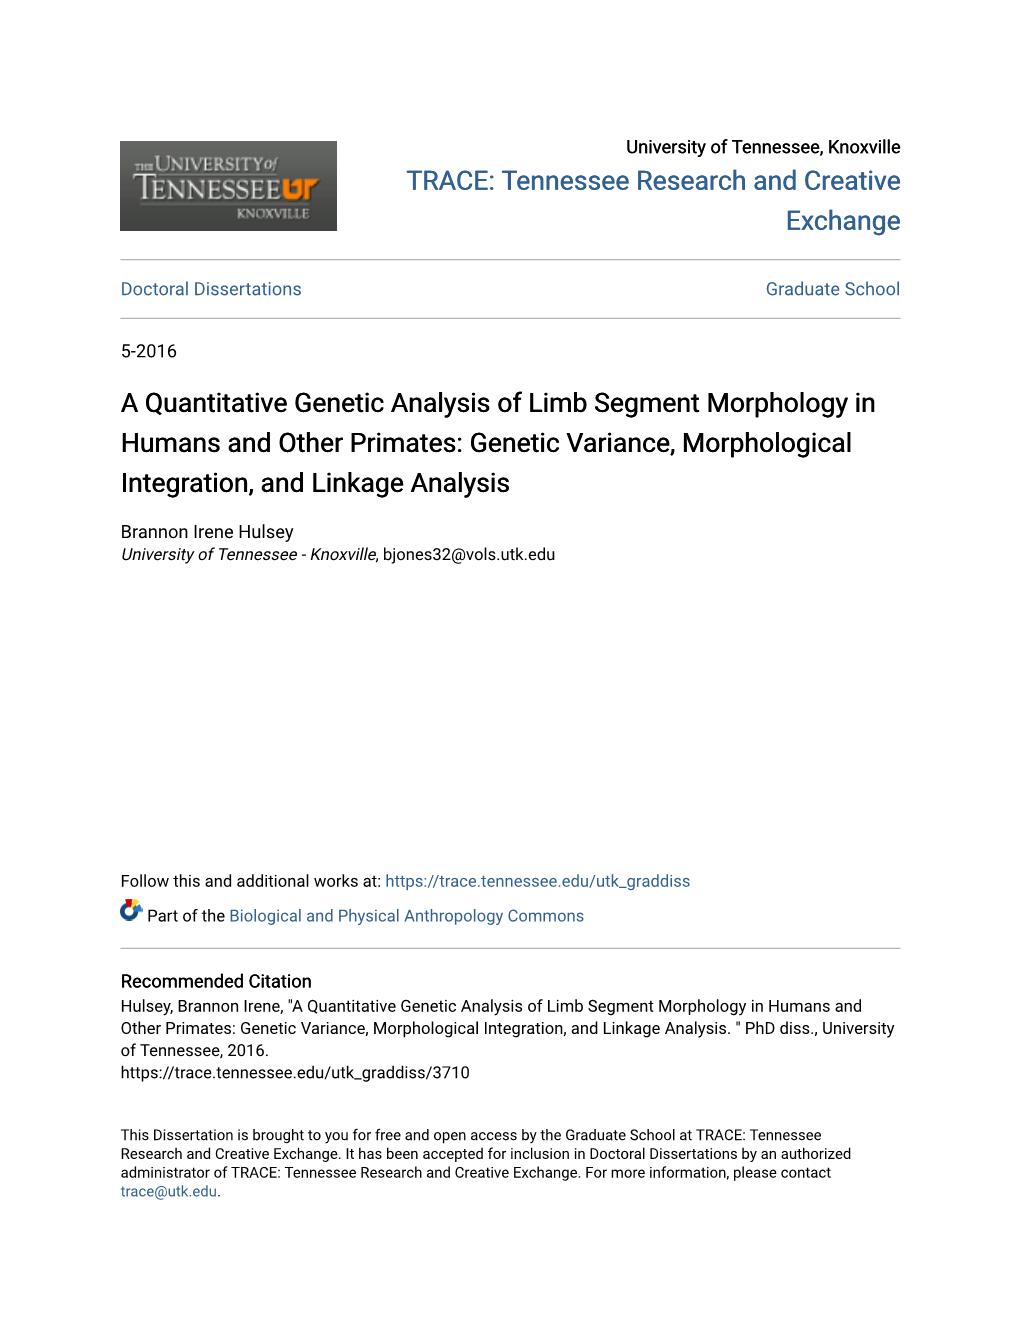 A Quantitative Genetic Analysis of Limb Segment Morphology in Humans and Other Primates: Genetic Variance, Morphological Integration, and Linkage Analysis